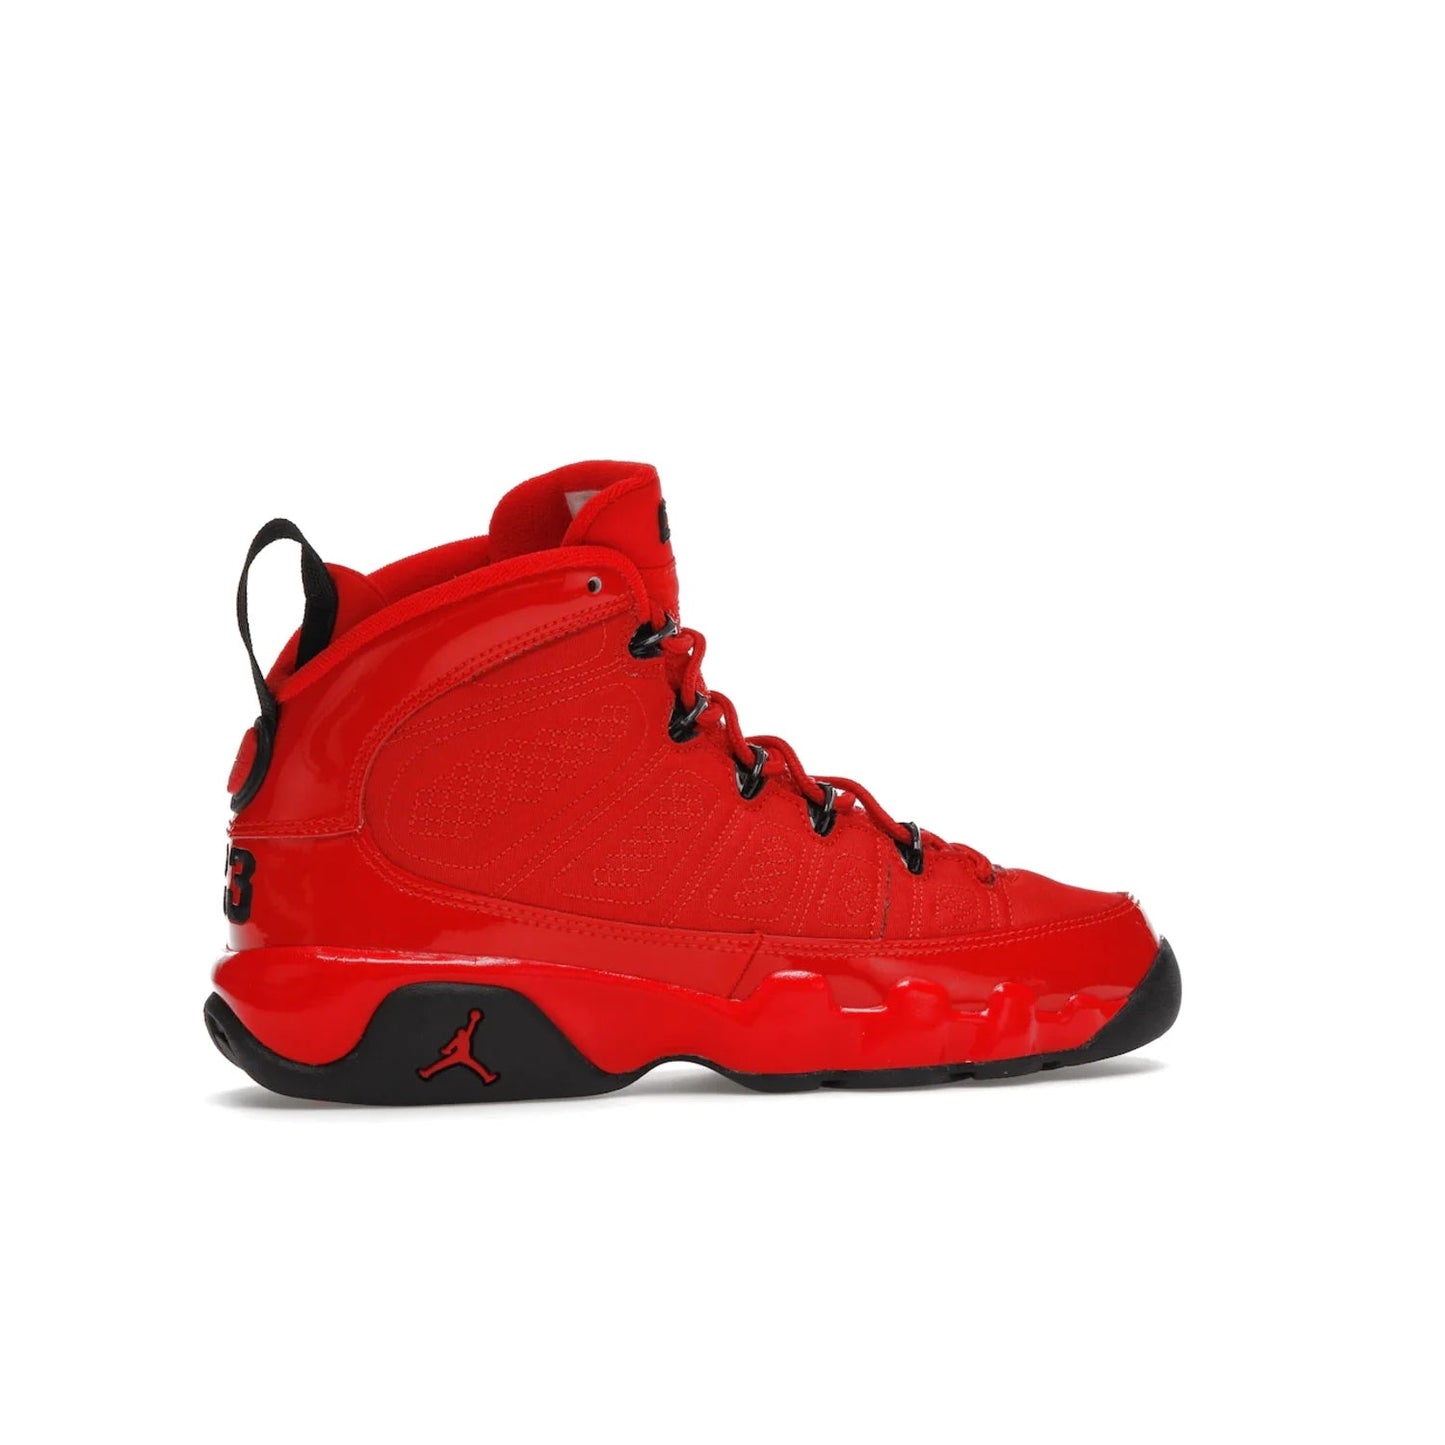 Jordan 9 Retro Chile Red (GS) - Image 35 - Only at www.BallersClubKickz.com - Introducing the Air Jordan 9 Retro Chile Red (GS), a vintage 1993 silhouette with fiery colorway. Features quilted side paneling, glossy patent leather, pull tabs, black contrast accents, and foam midsole. Launching May 2022 for $140.